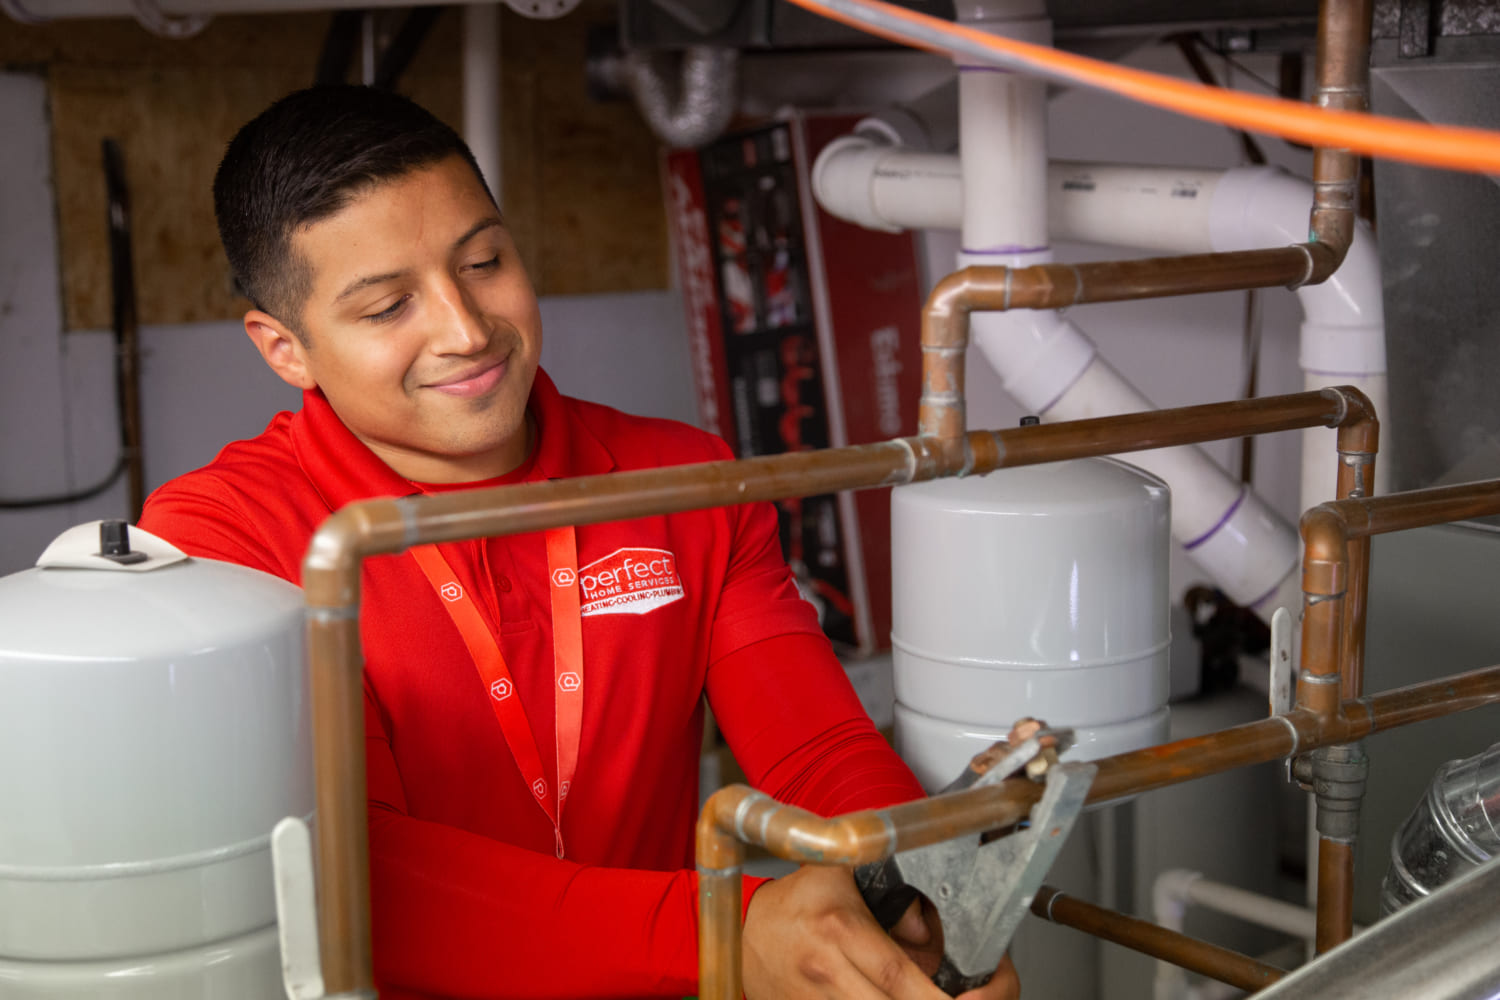 Perfect Home Services technician repairing plumbing pipes